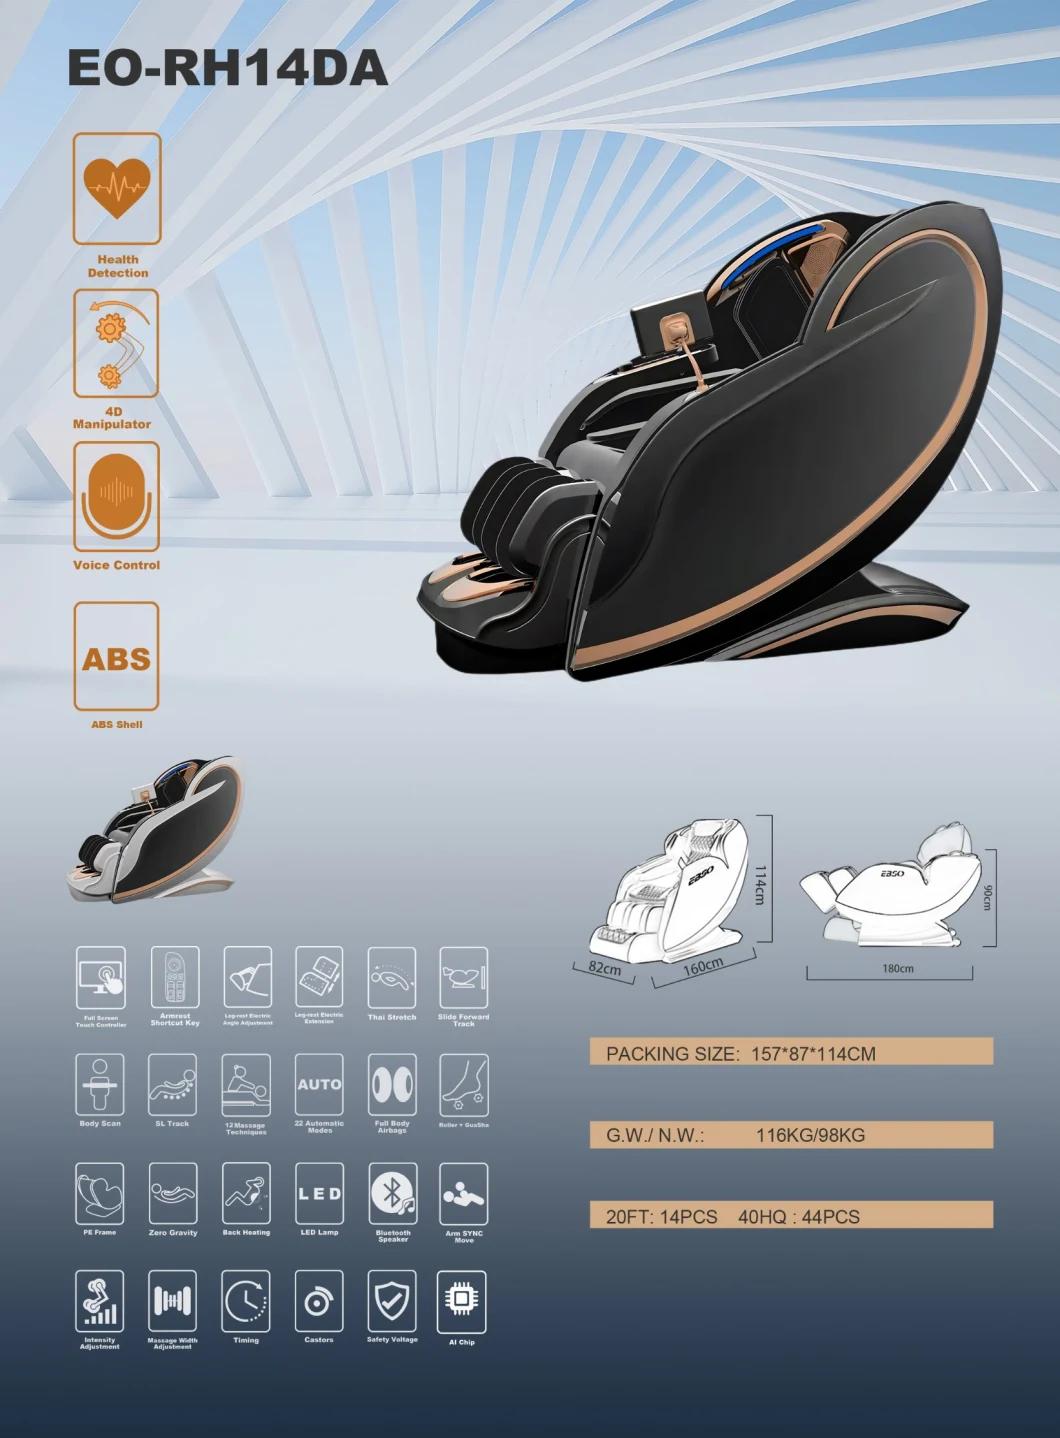 Massage Chair Full Body 2022 Back Massager Dimensios of The Massage Chair with Health Detection